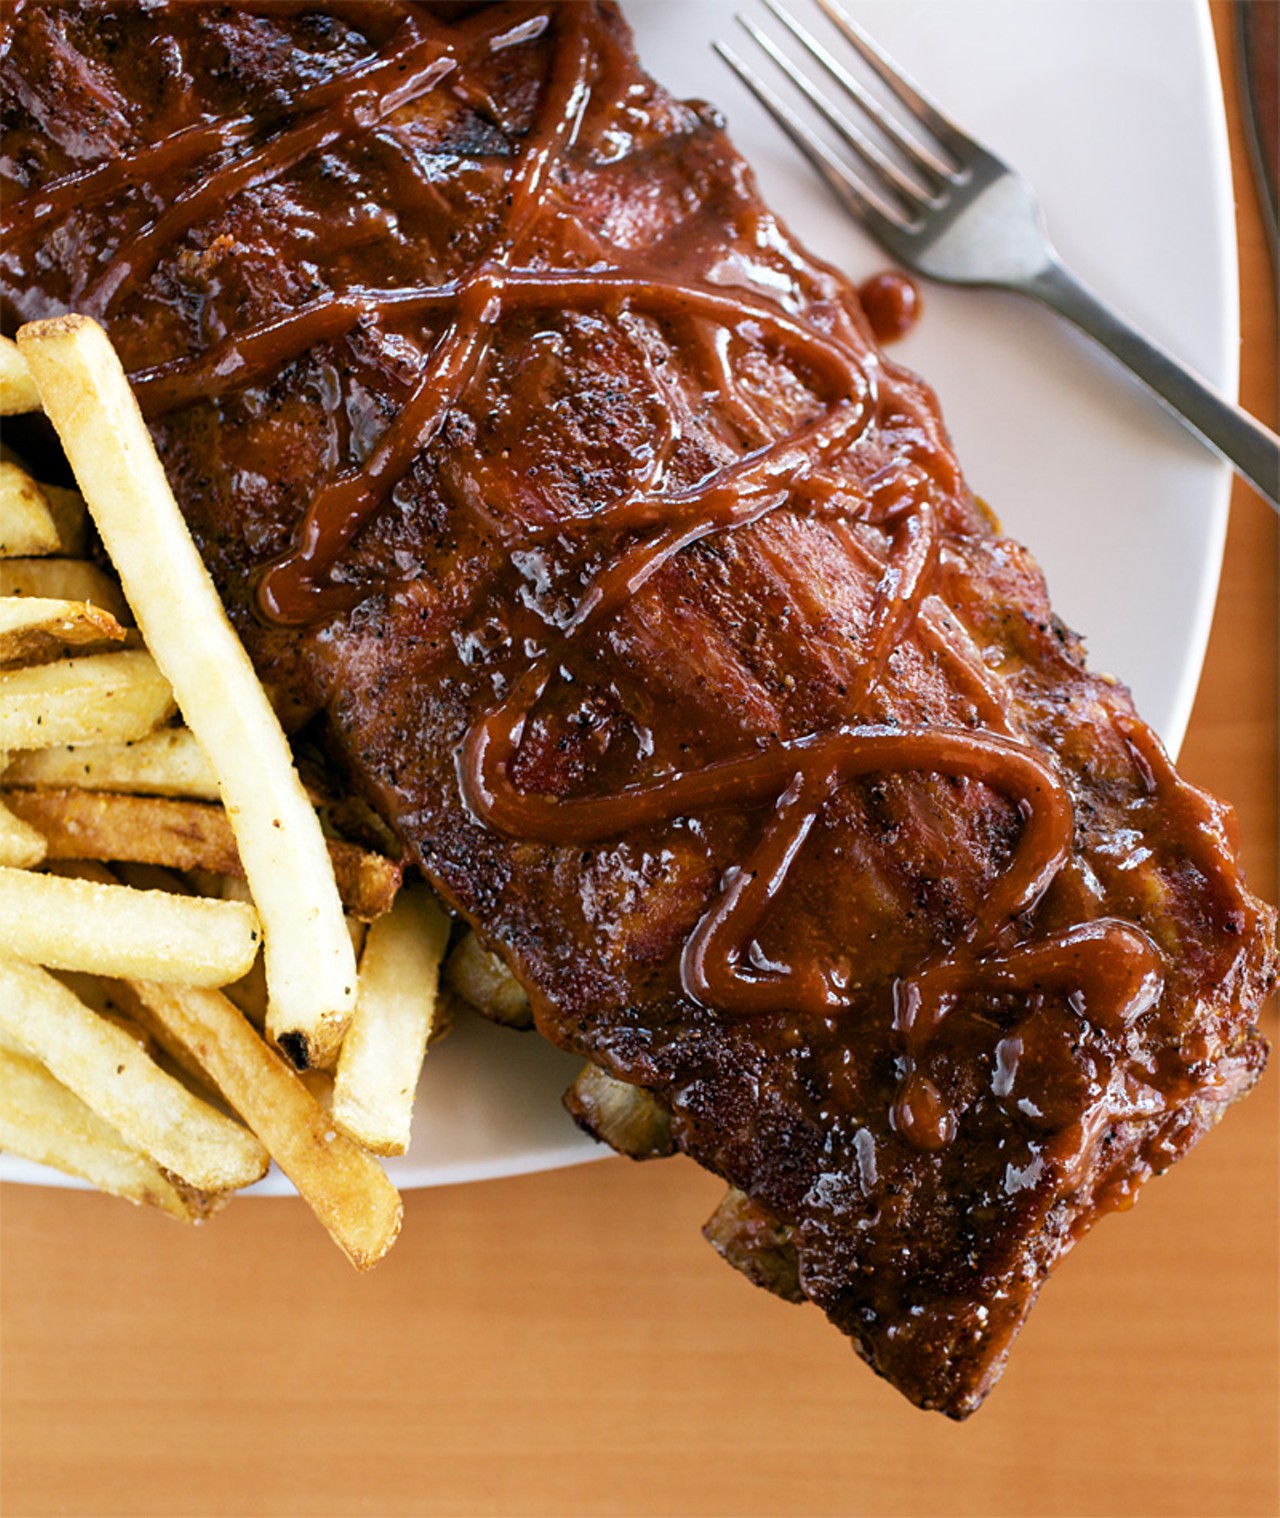 The BBQ ribs, cooked low and slow comes served with fries and coleslaw. They recommend pairing your ribs with their Pecan Brown Ale.